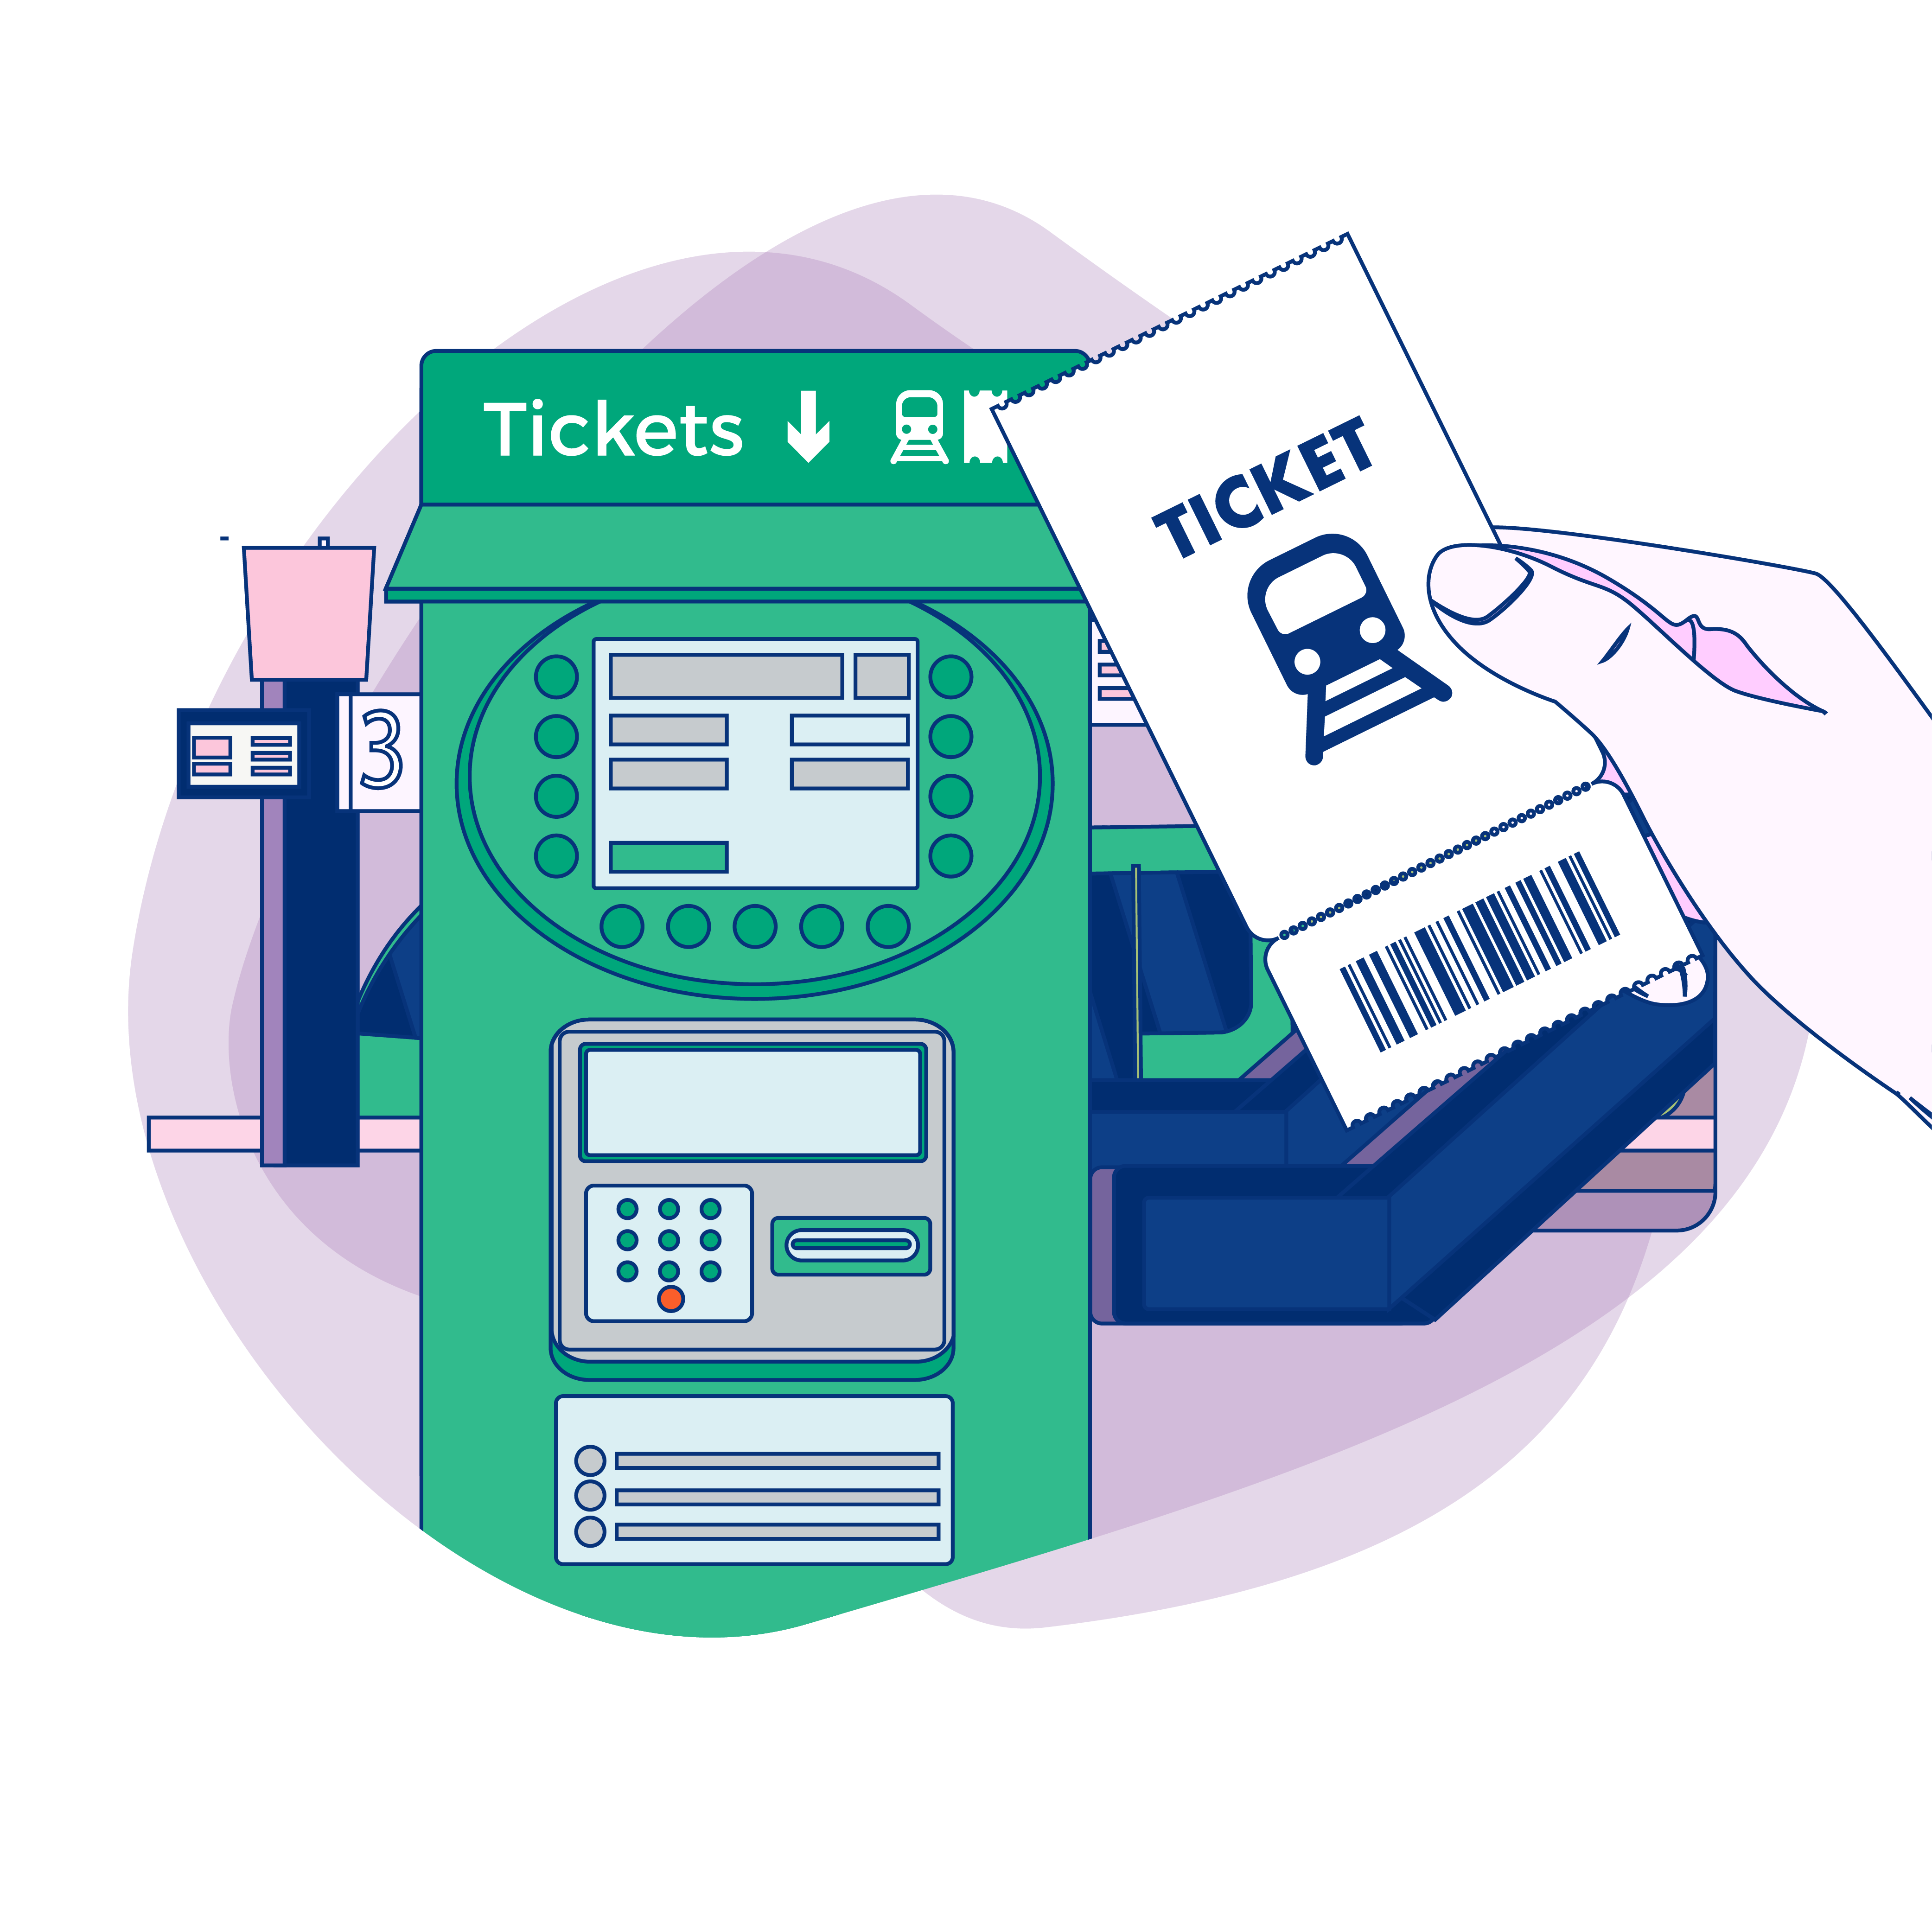 Illustration of a person buying a ticket in a machine